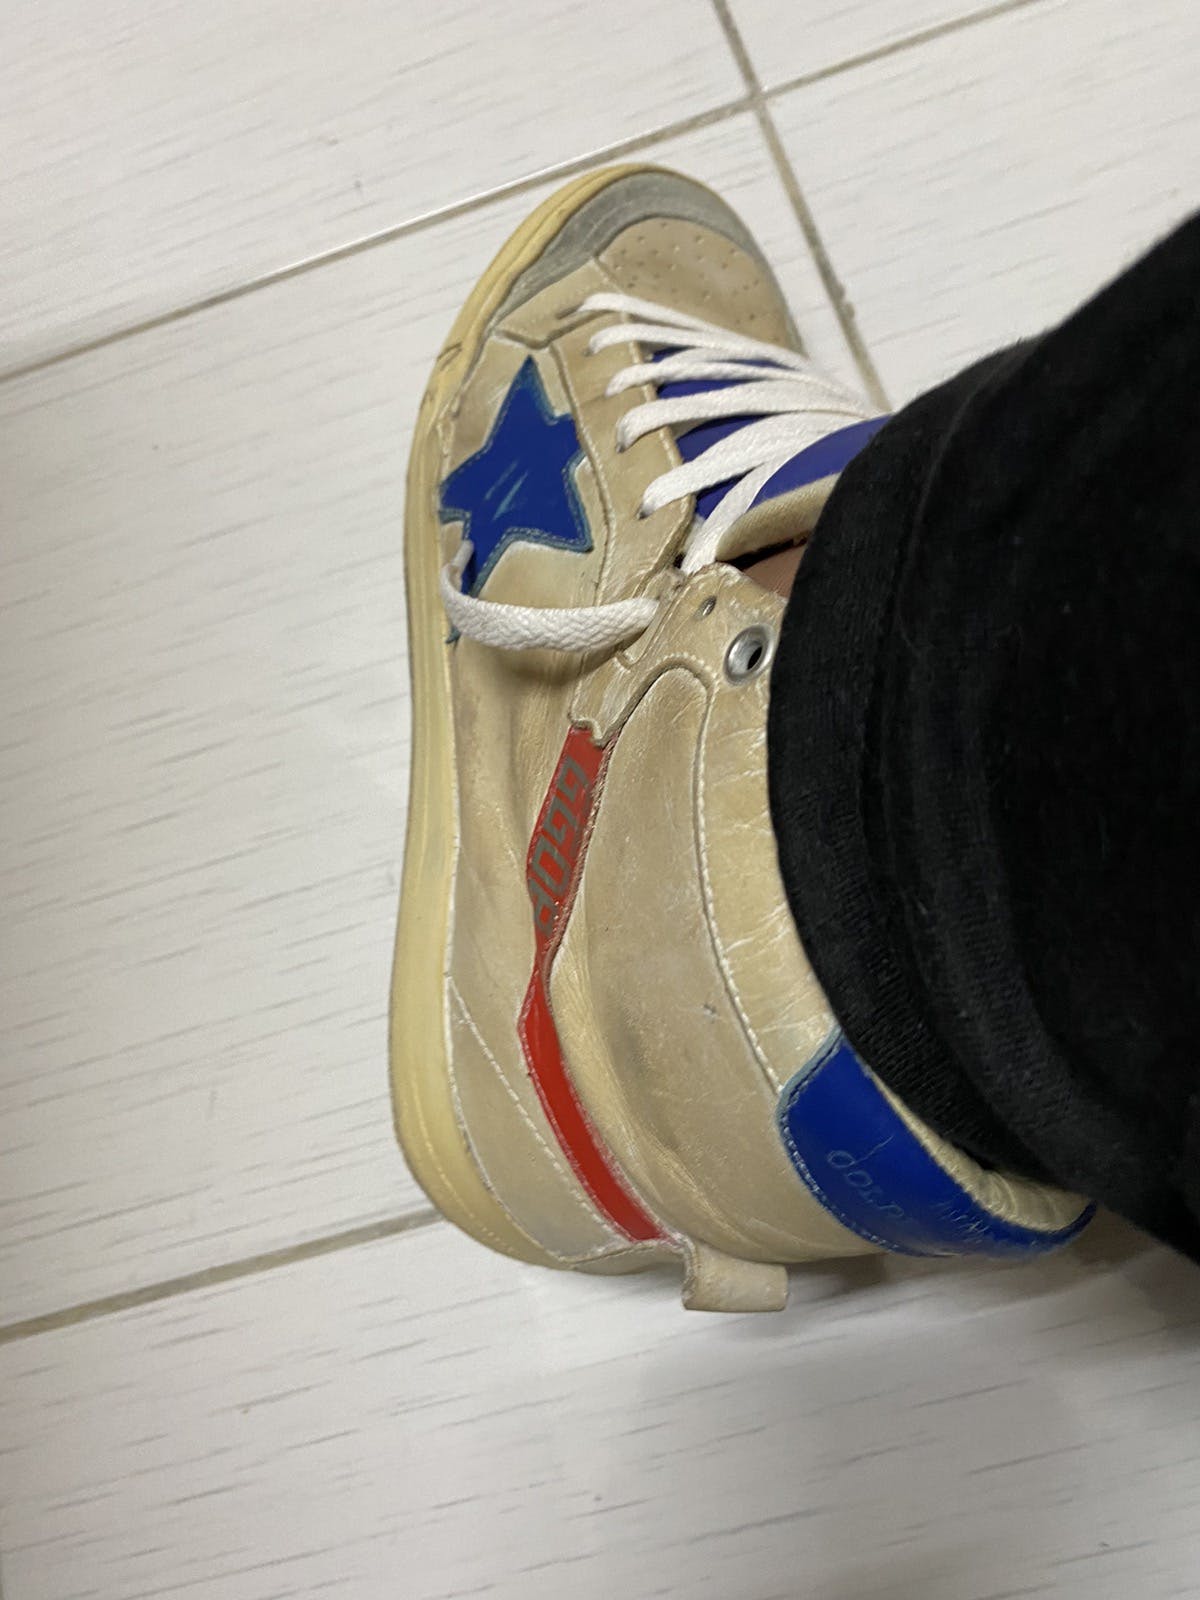 GOLDEN GOOSE vce 2.12 ggdb Sneakers size 41 or us 11 - 19